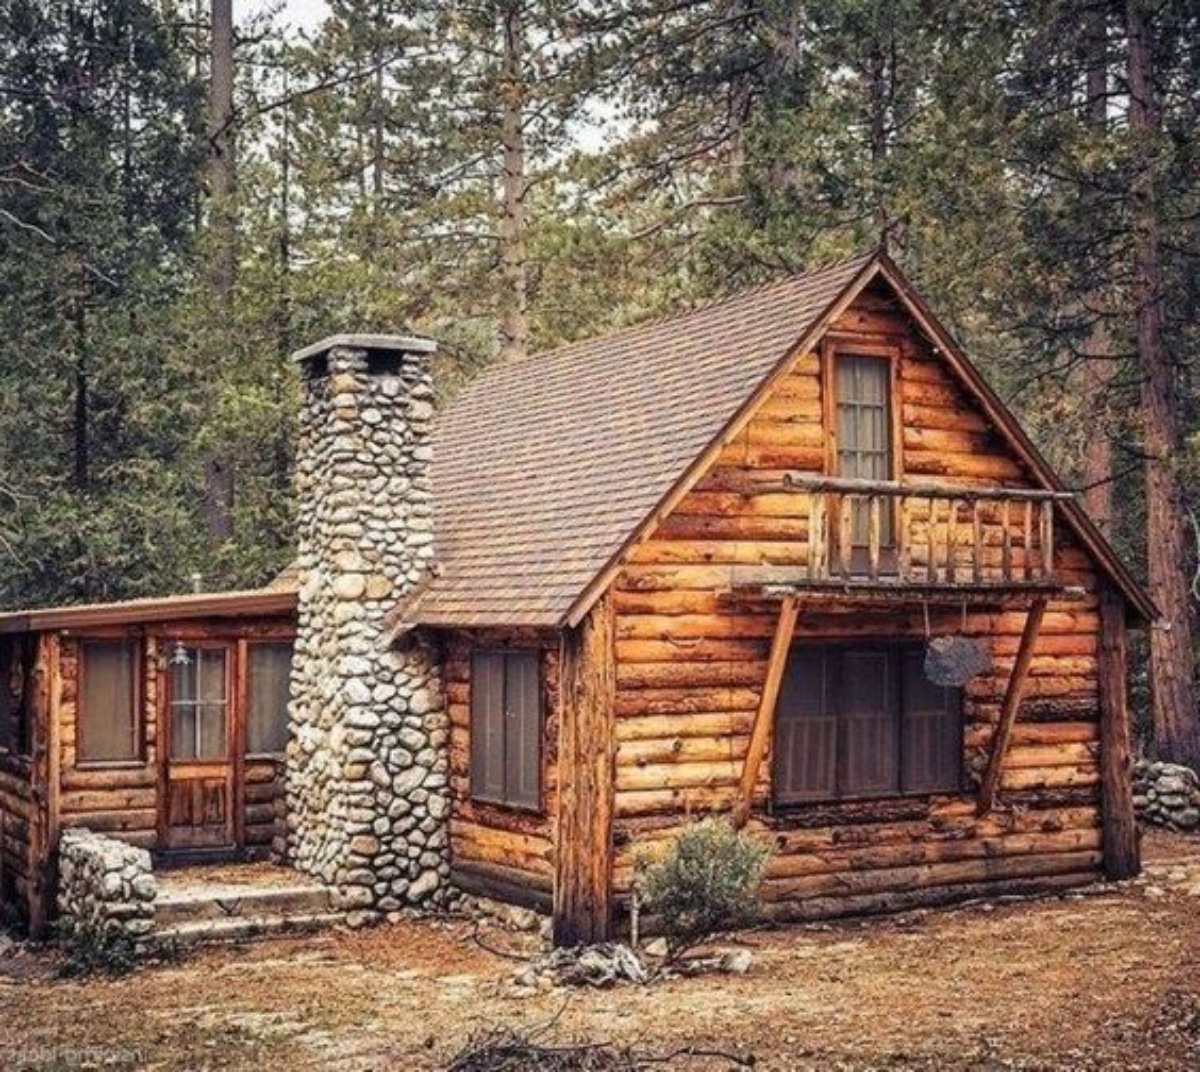 Small but luxurious Log Cabin in the woods